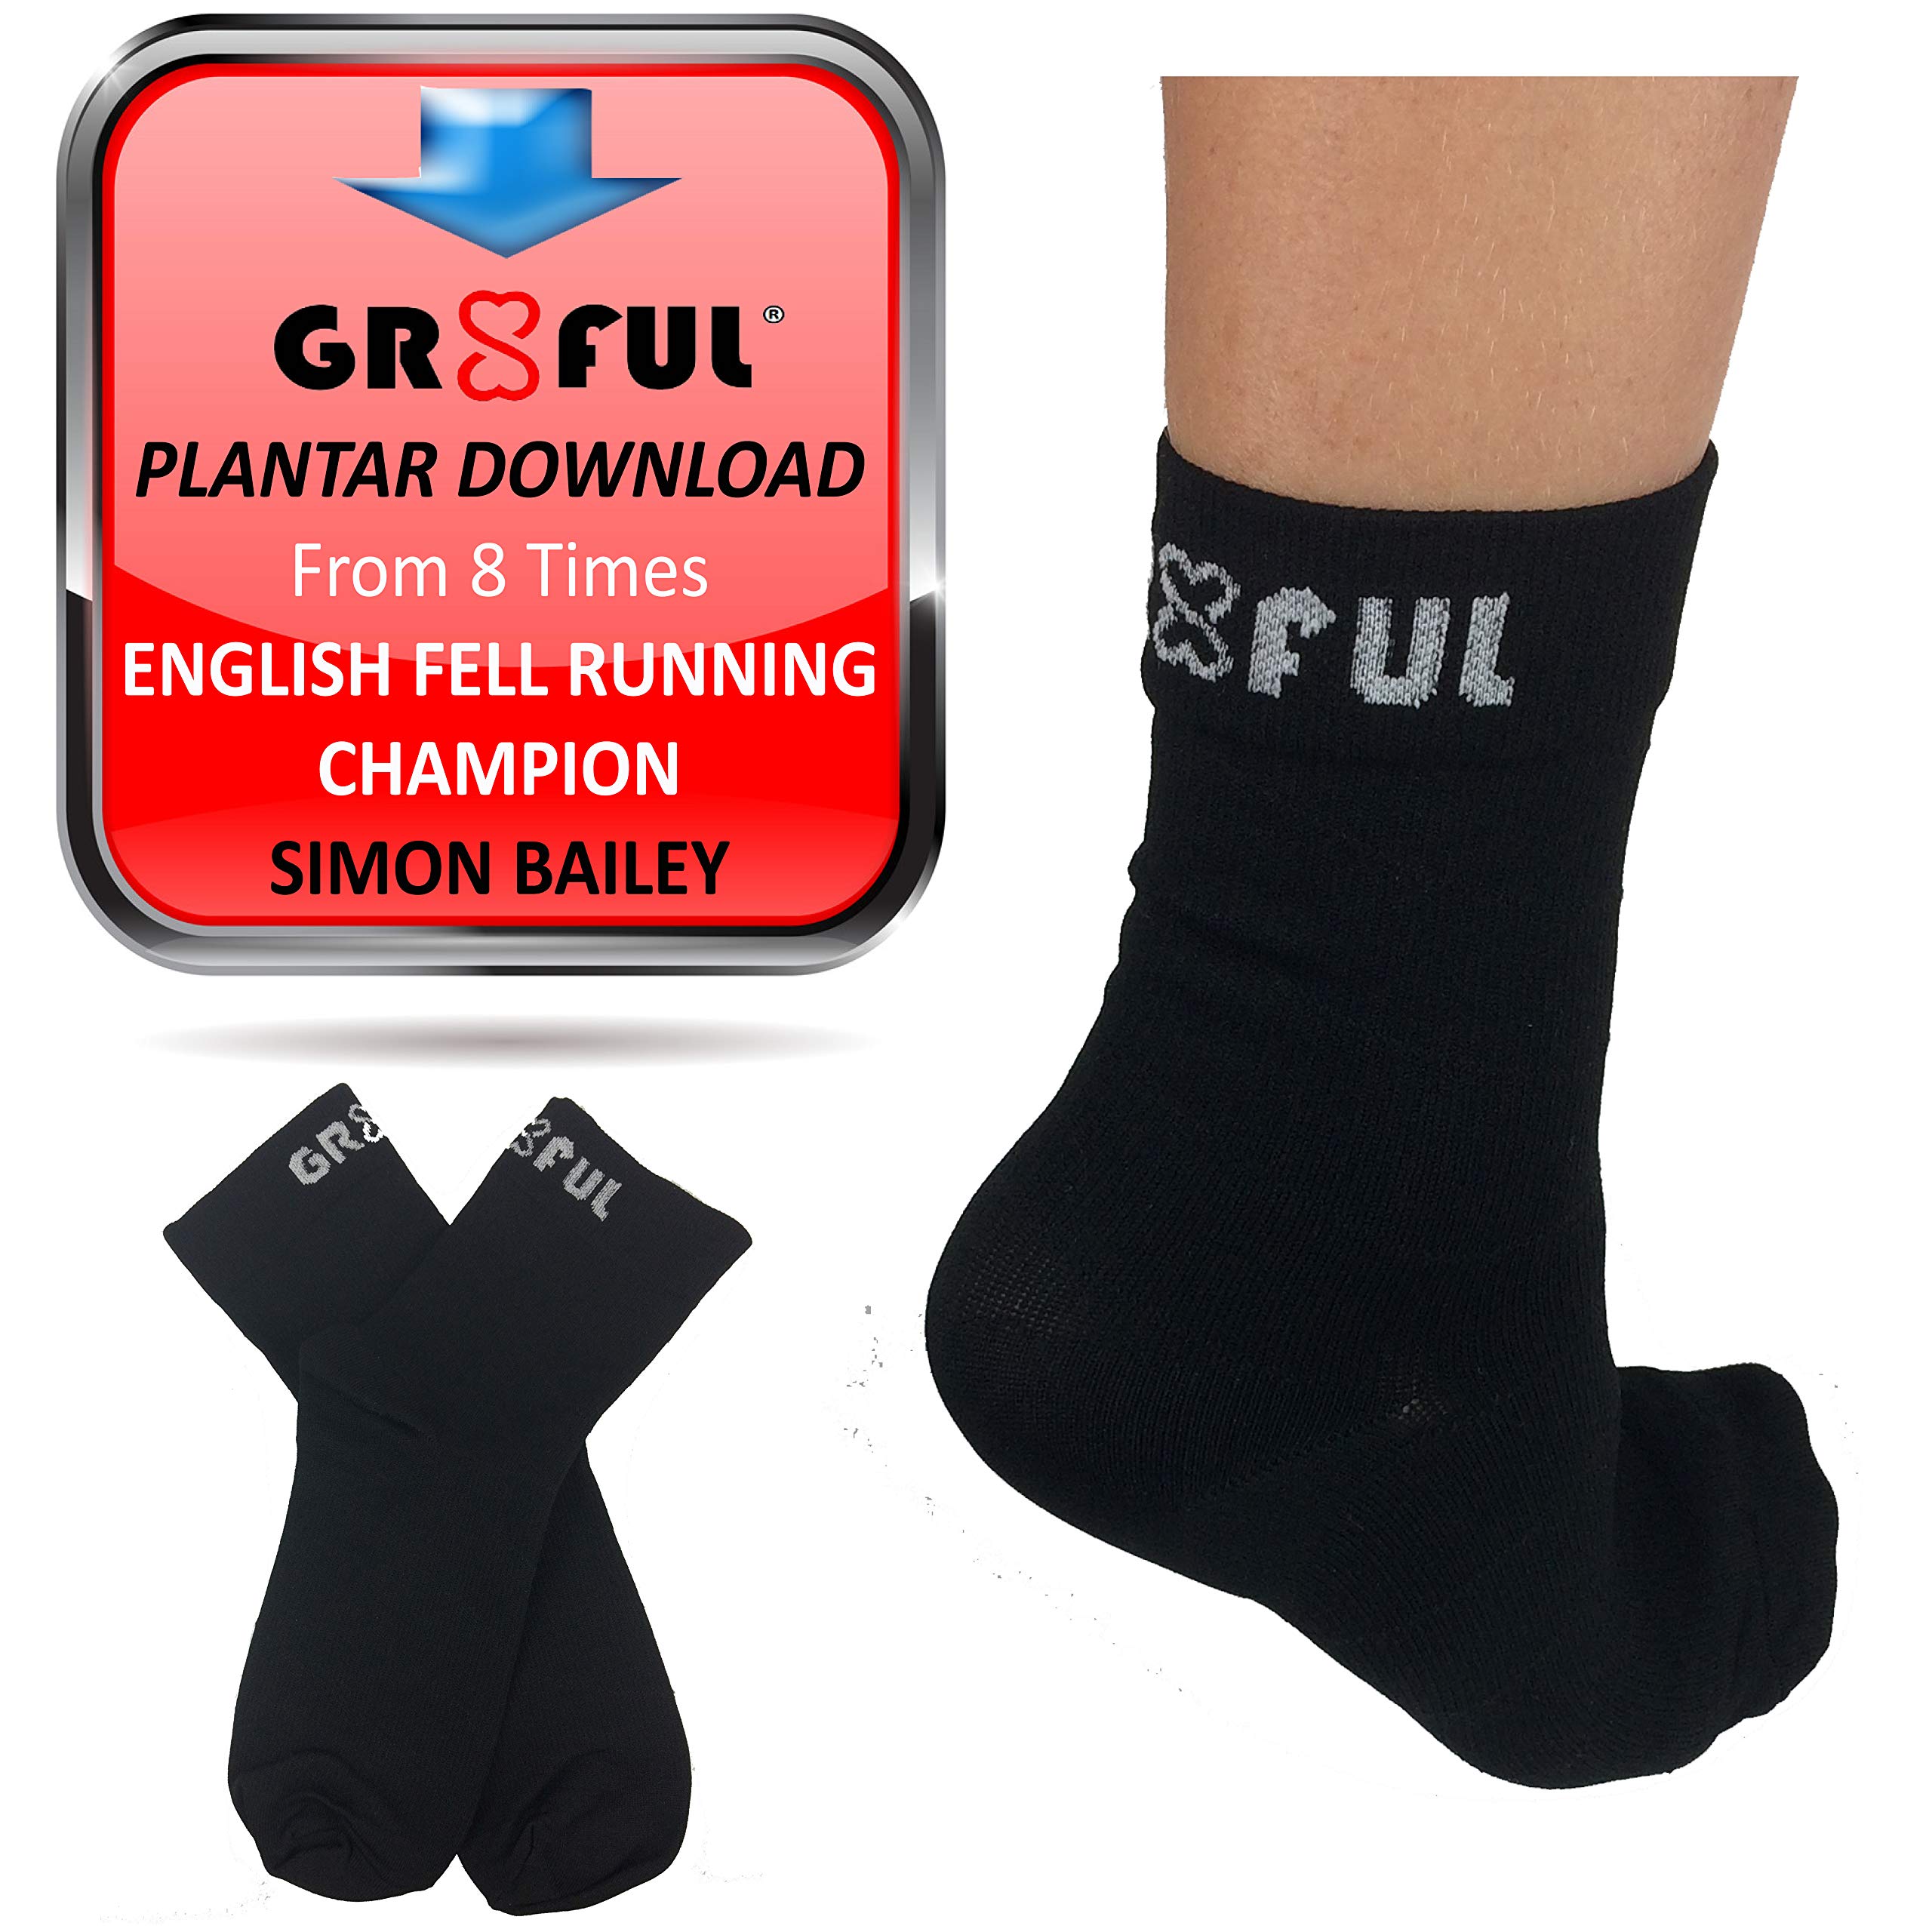 gr8ful Compression Socks for Plantar Fasciitis + Achilles Tendonitis, Short Ankle, Sport Running or Everyday, Arch & Foot Support Treatment of  Pain Aid Recovery